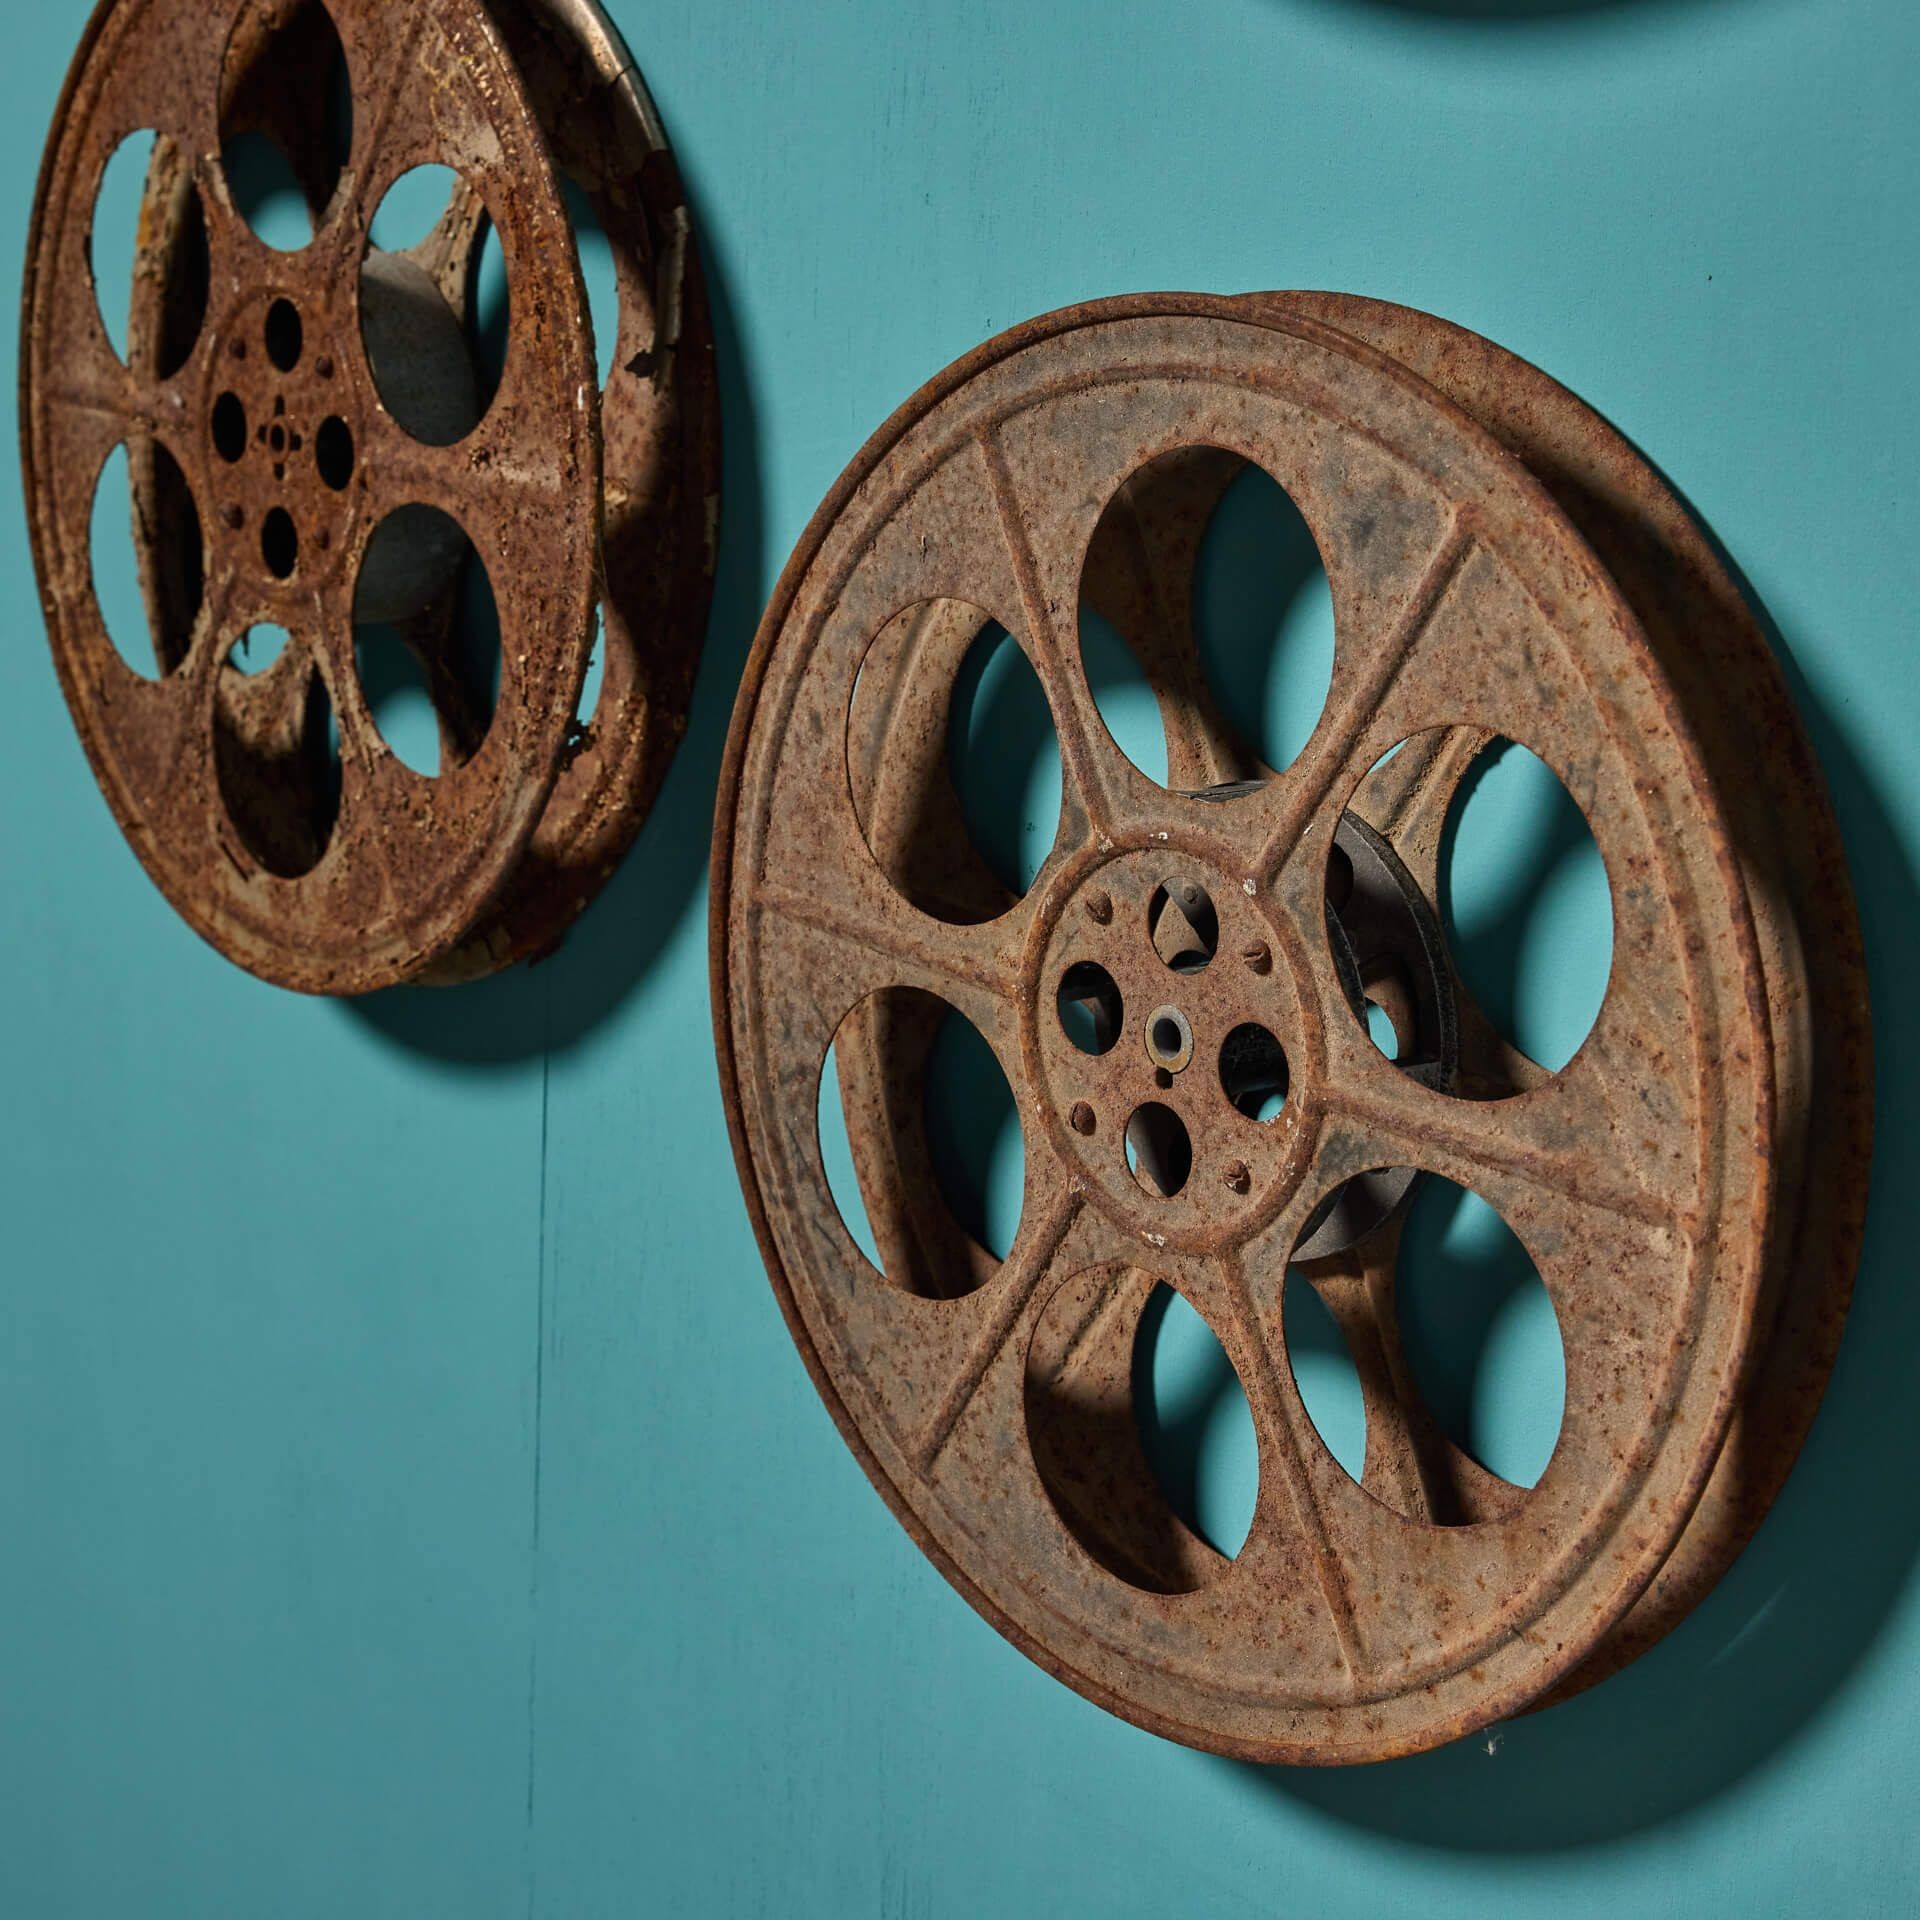 Collection of Vintage Cinema Projection Reels or Spools - UK Architectural  Heritage